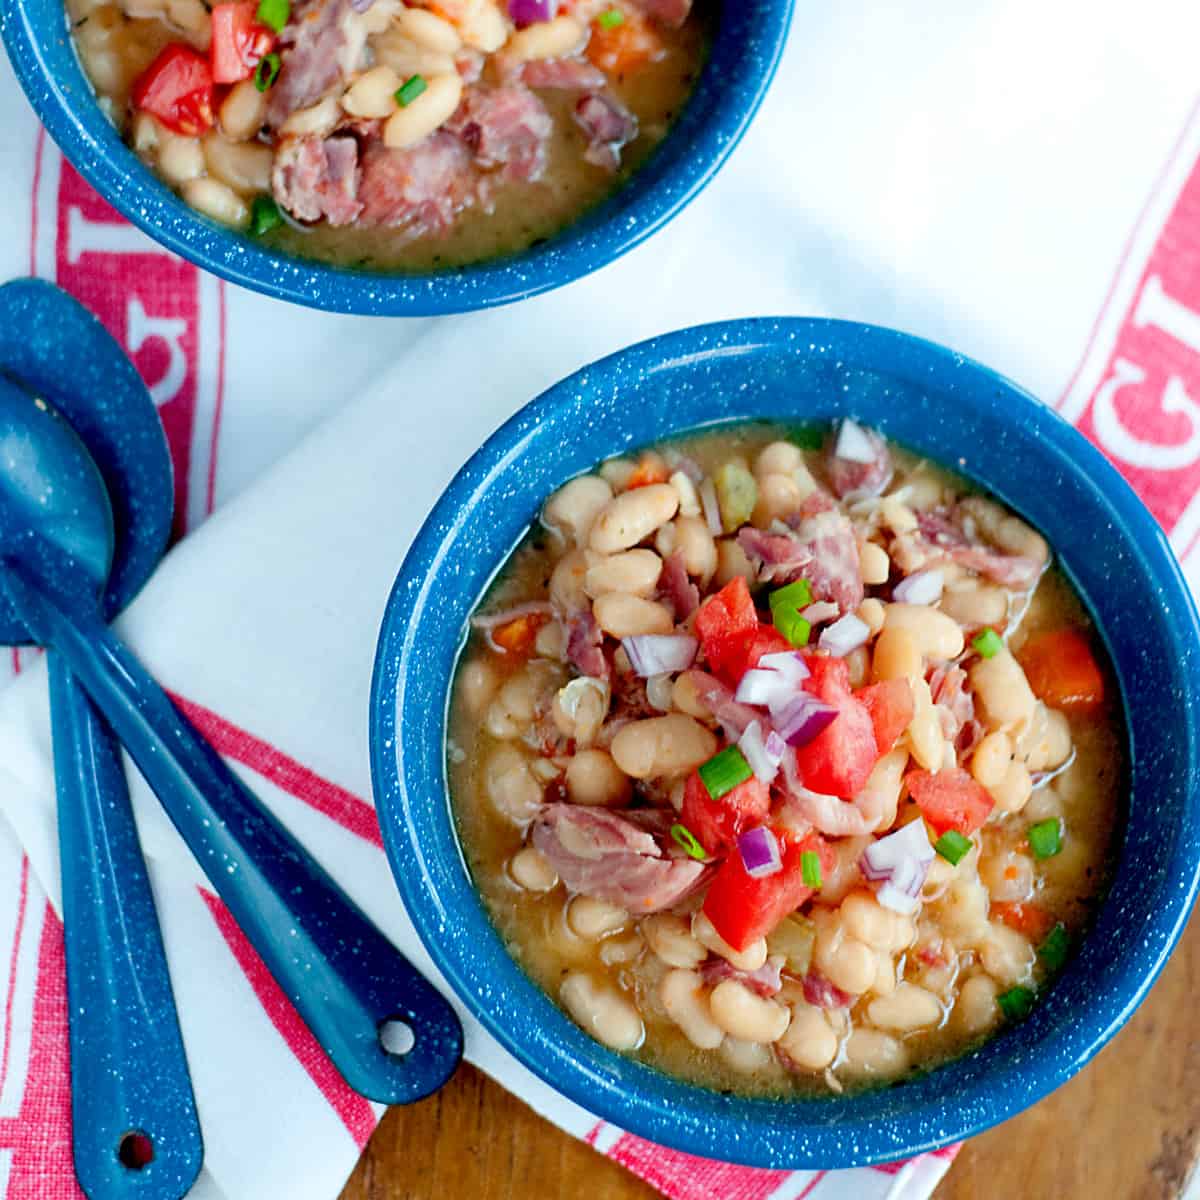 Two bowls of Slow Cooker White Beans with Smoked Ham Hocks presented on a wooden board with a kitchen towel and spoons.